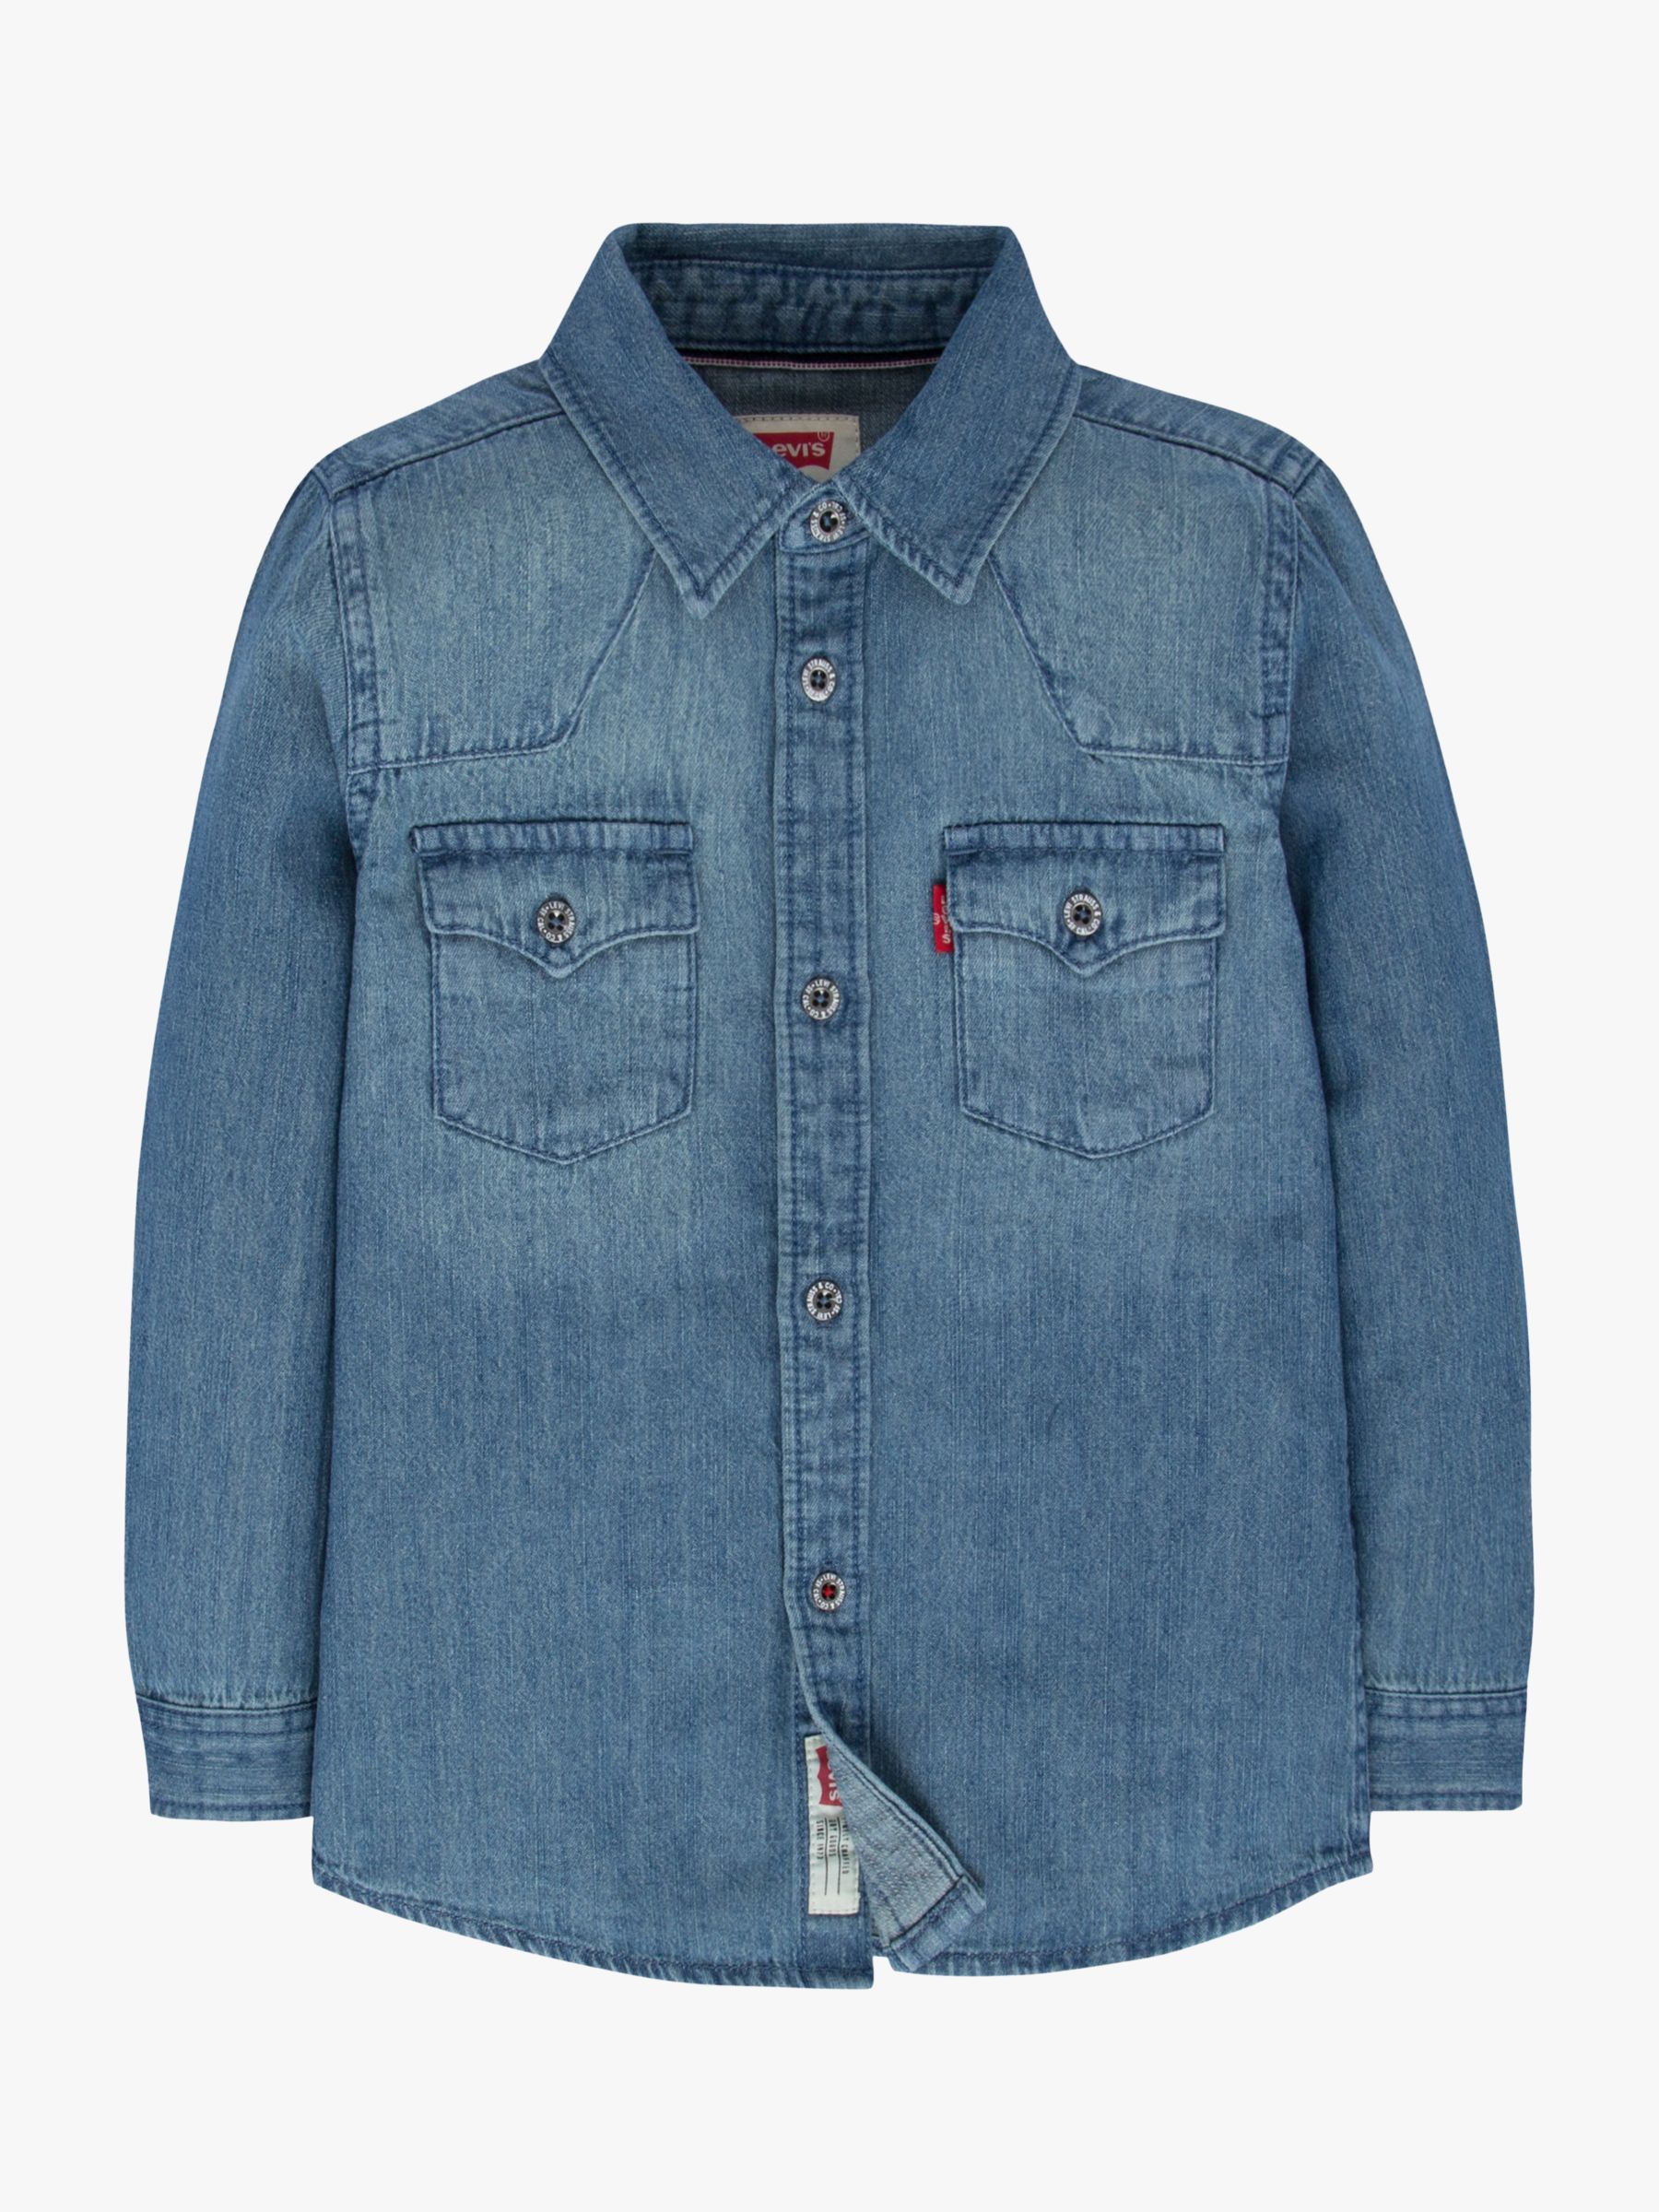 Image of Levis Boys Barstow West Shirt Blue